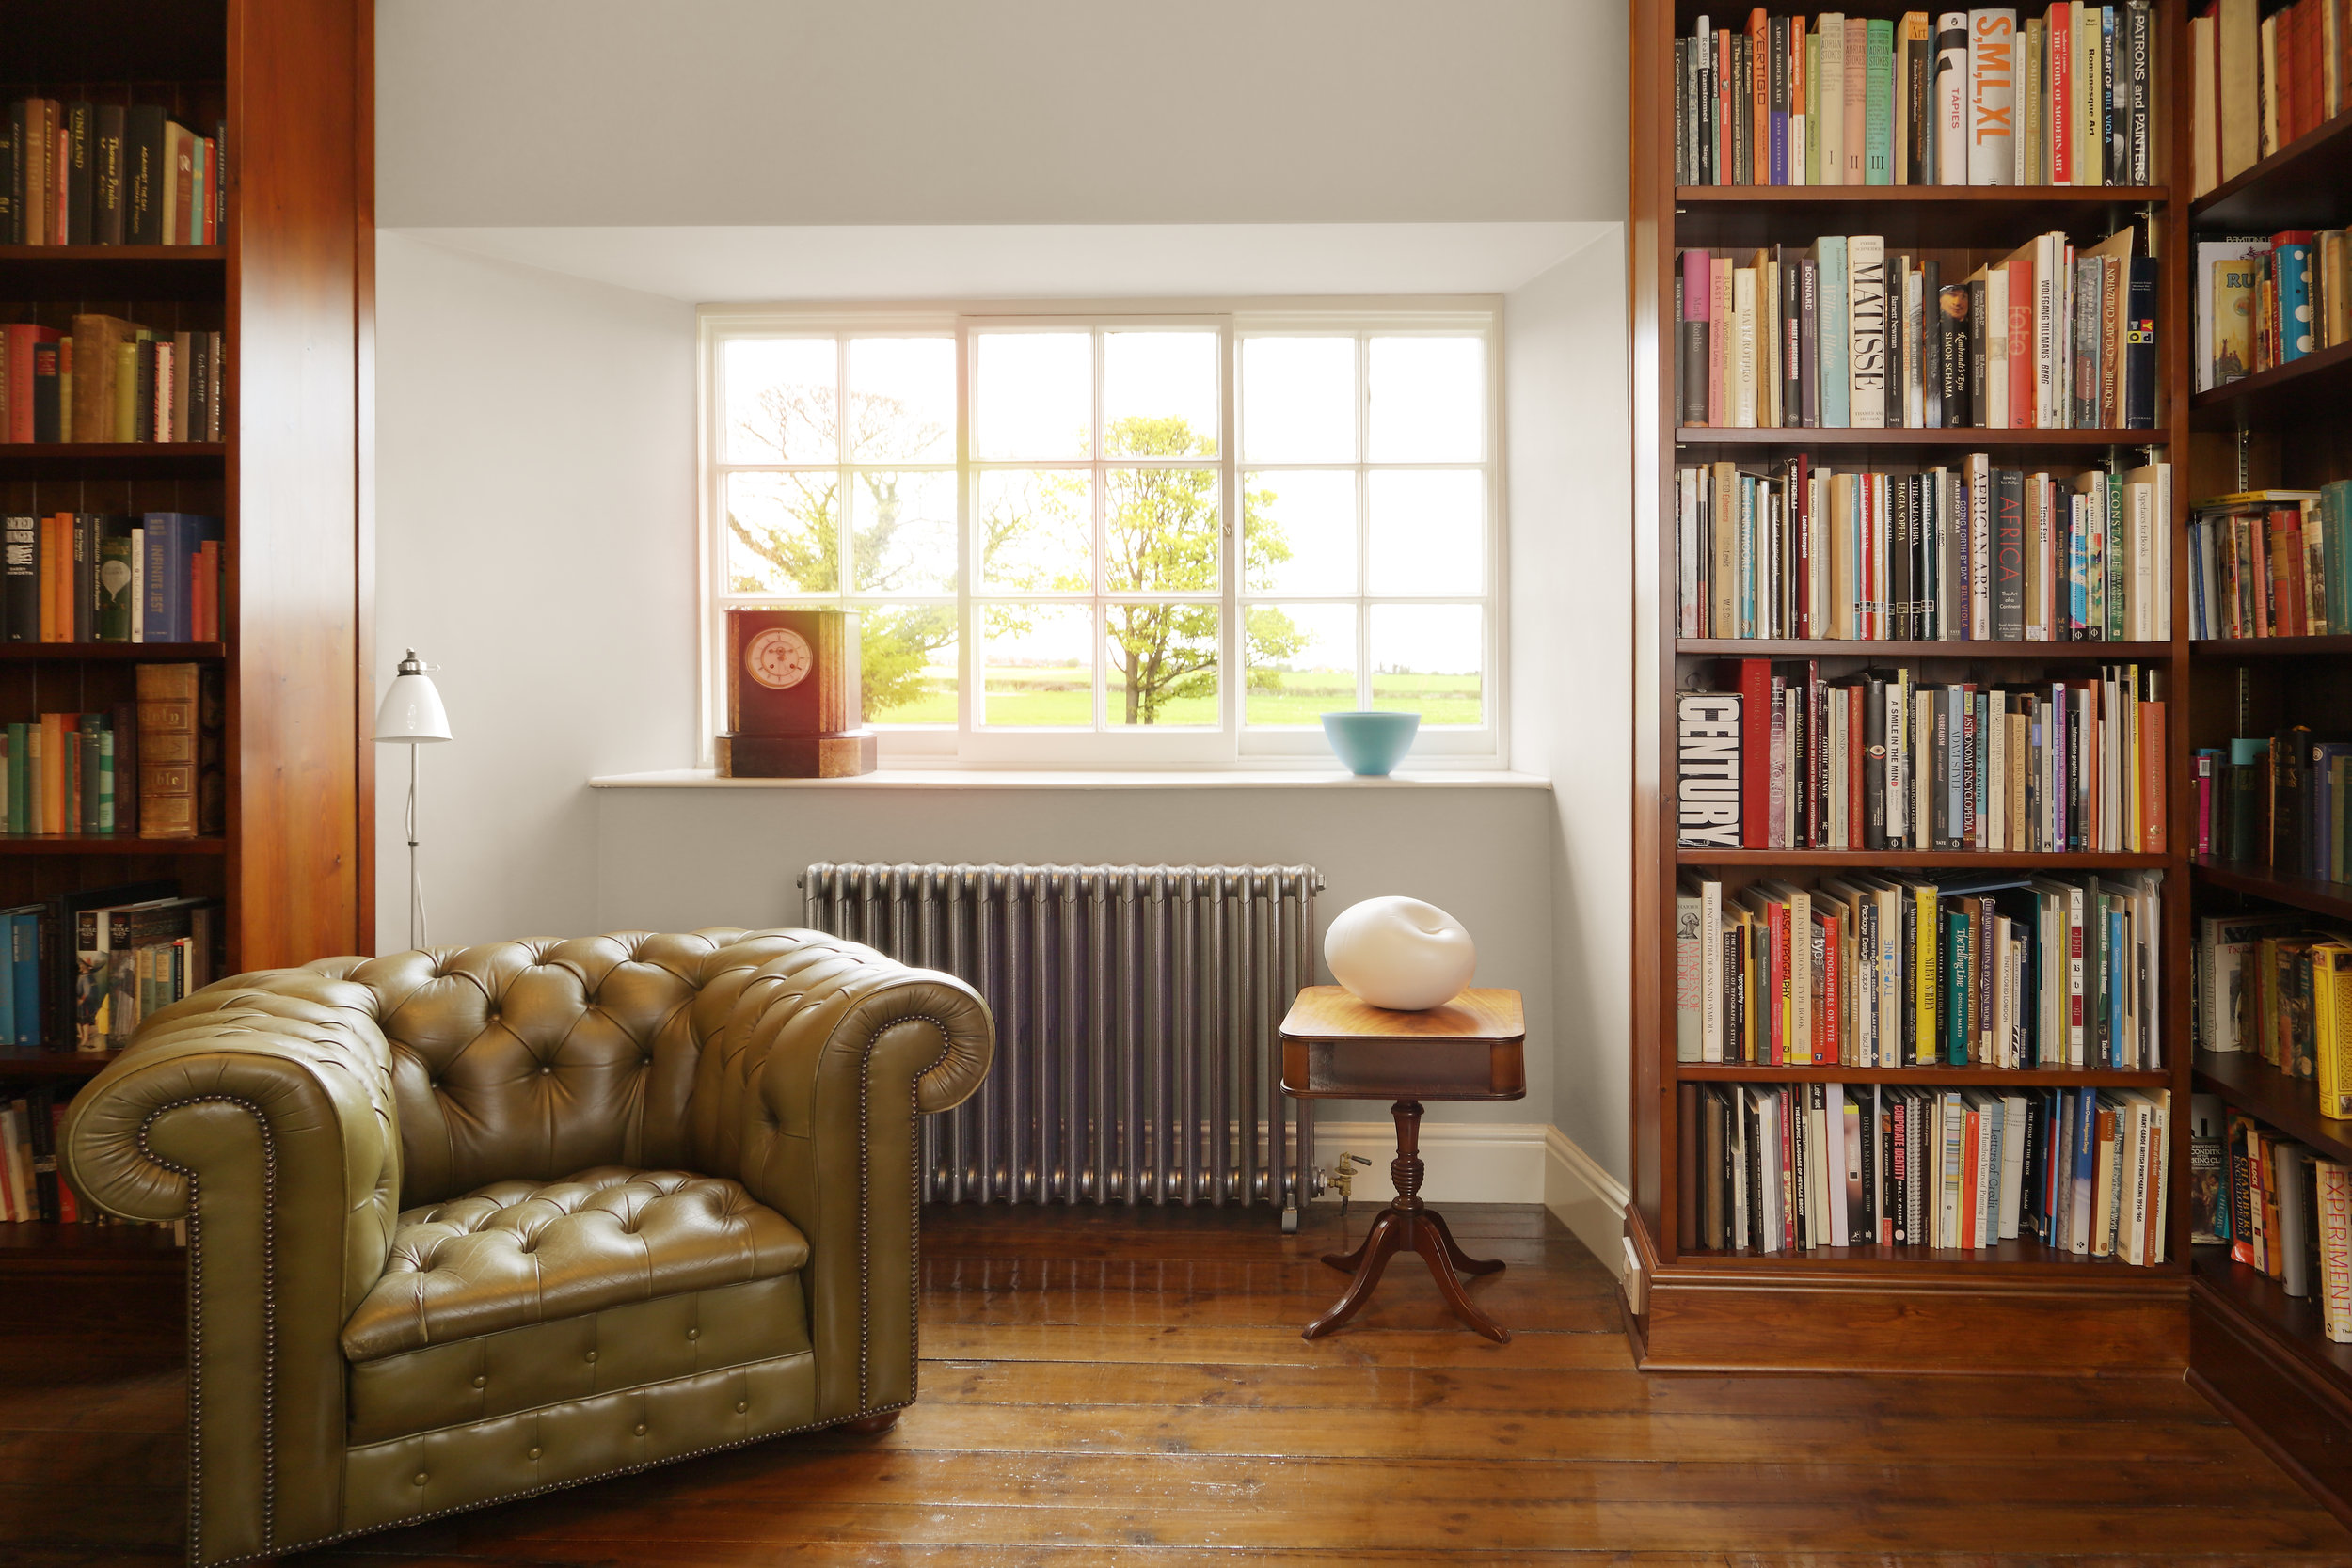  A metallic silver four column cast iron radiator in a relaxing library. A leather chesterfield armchair is surrounded by floor to ceiling bookshelves 